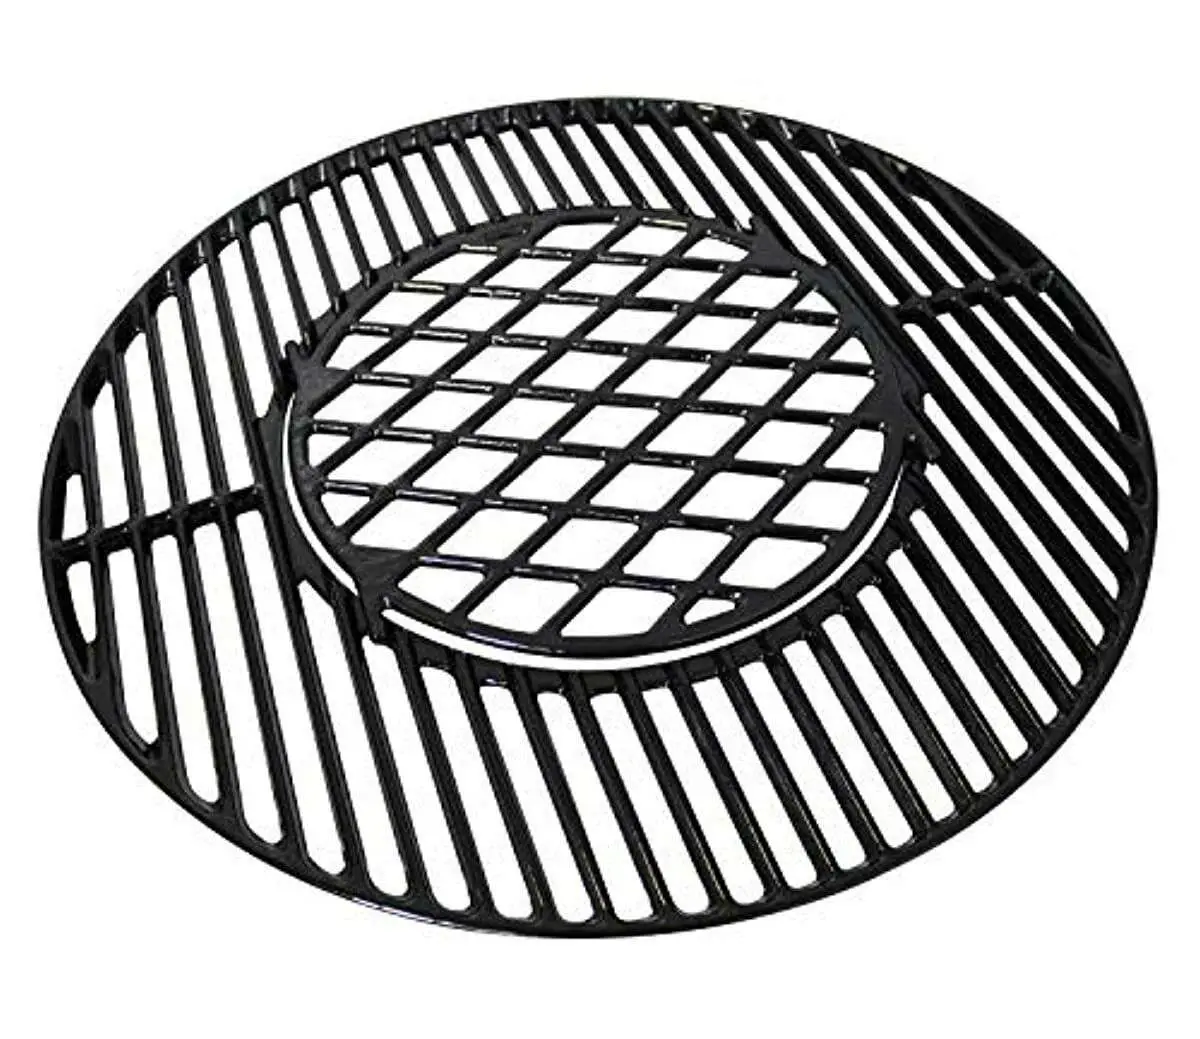 Porcelain Coated Cast Iron Round Cooking Grid Grate 22 ...